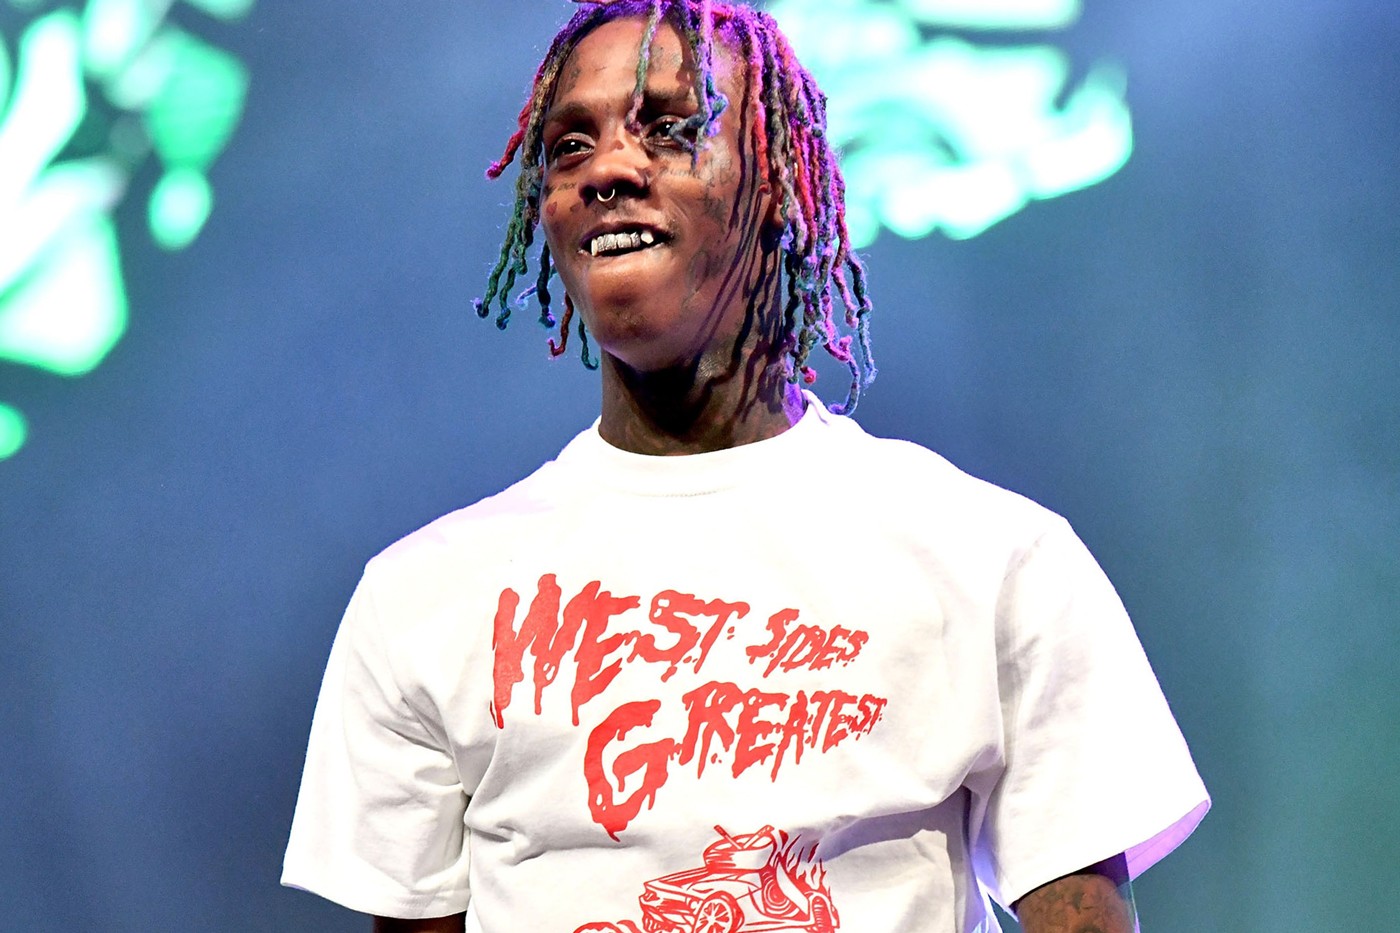 Famous Dex Reportedly Robbed at Gunpoint for $50K Watch and Cash